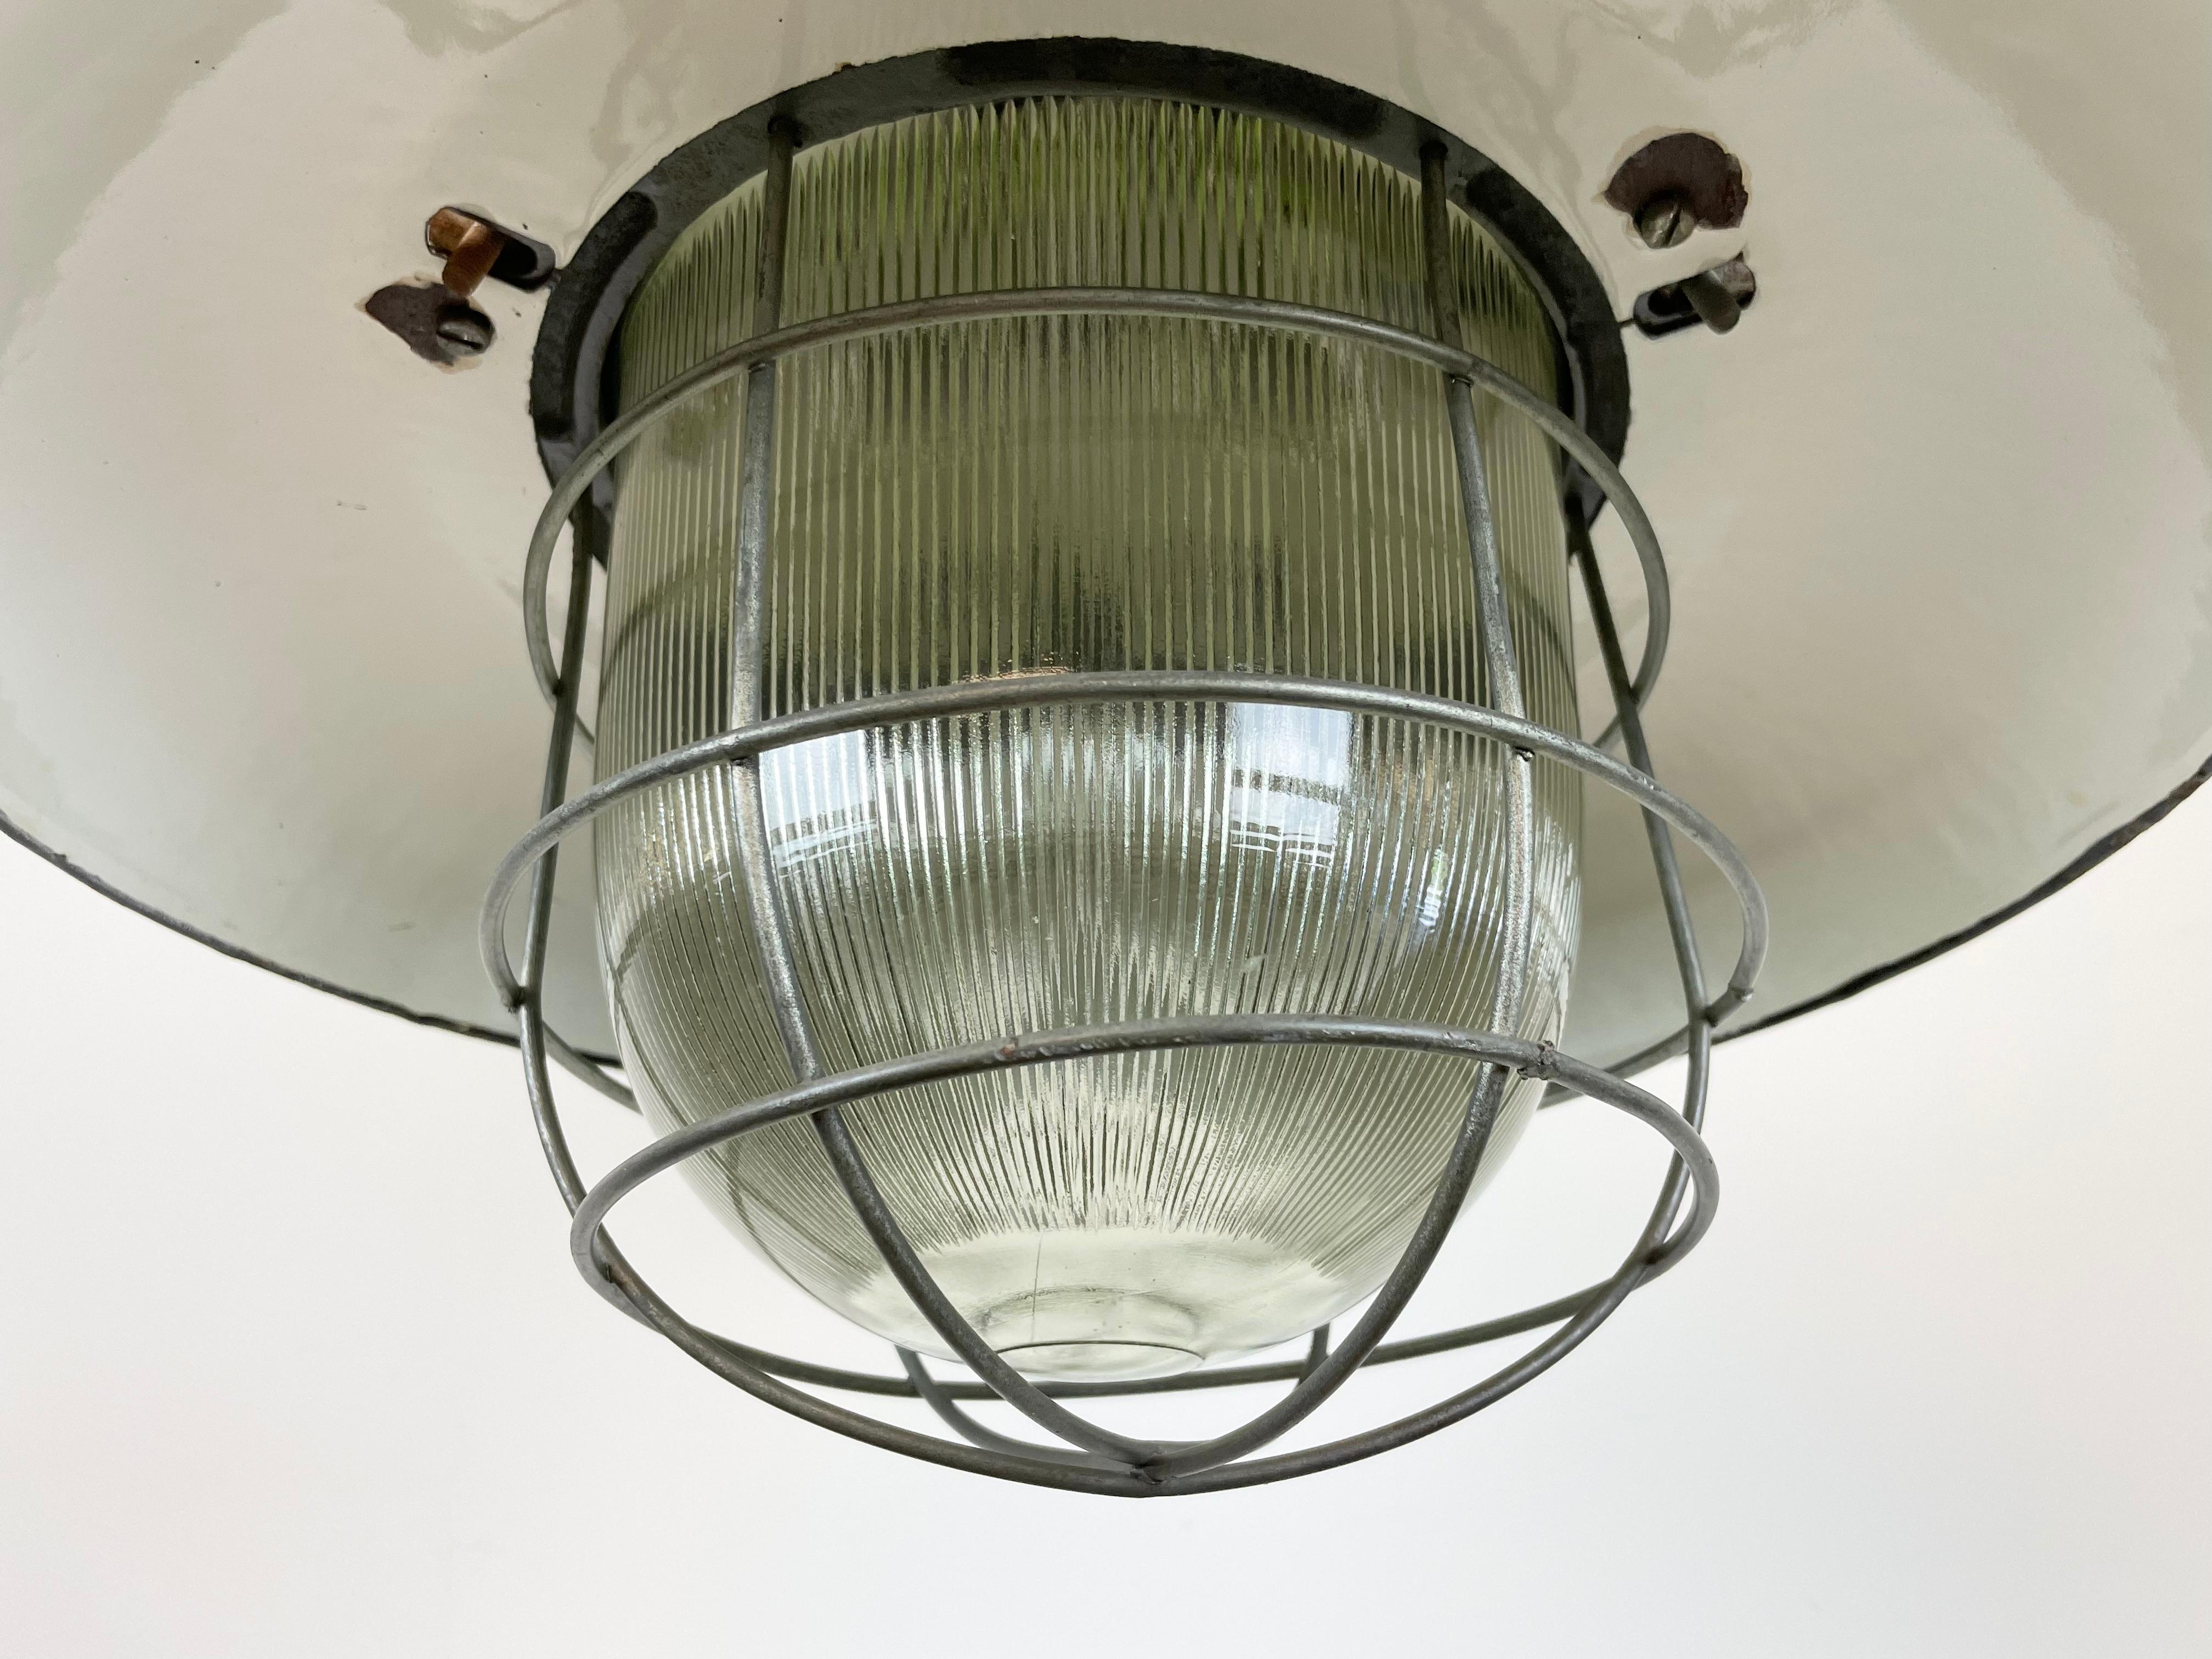 Industrial Grey Enamel Factory Cage Pendant Lamp in Cast Iron from Zaos, 1960s For Sale 2